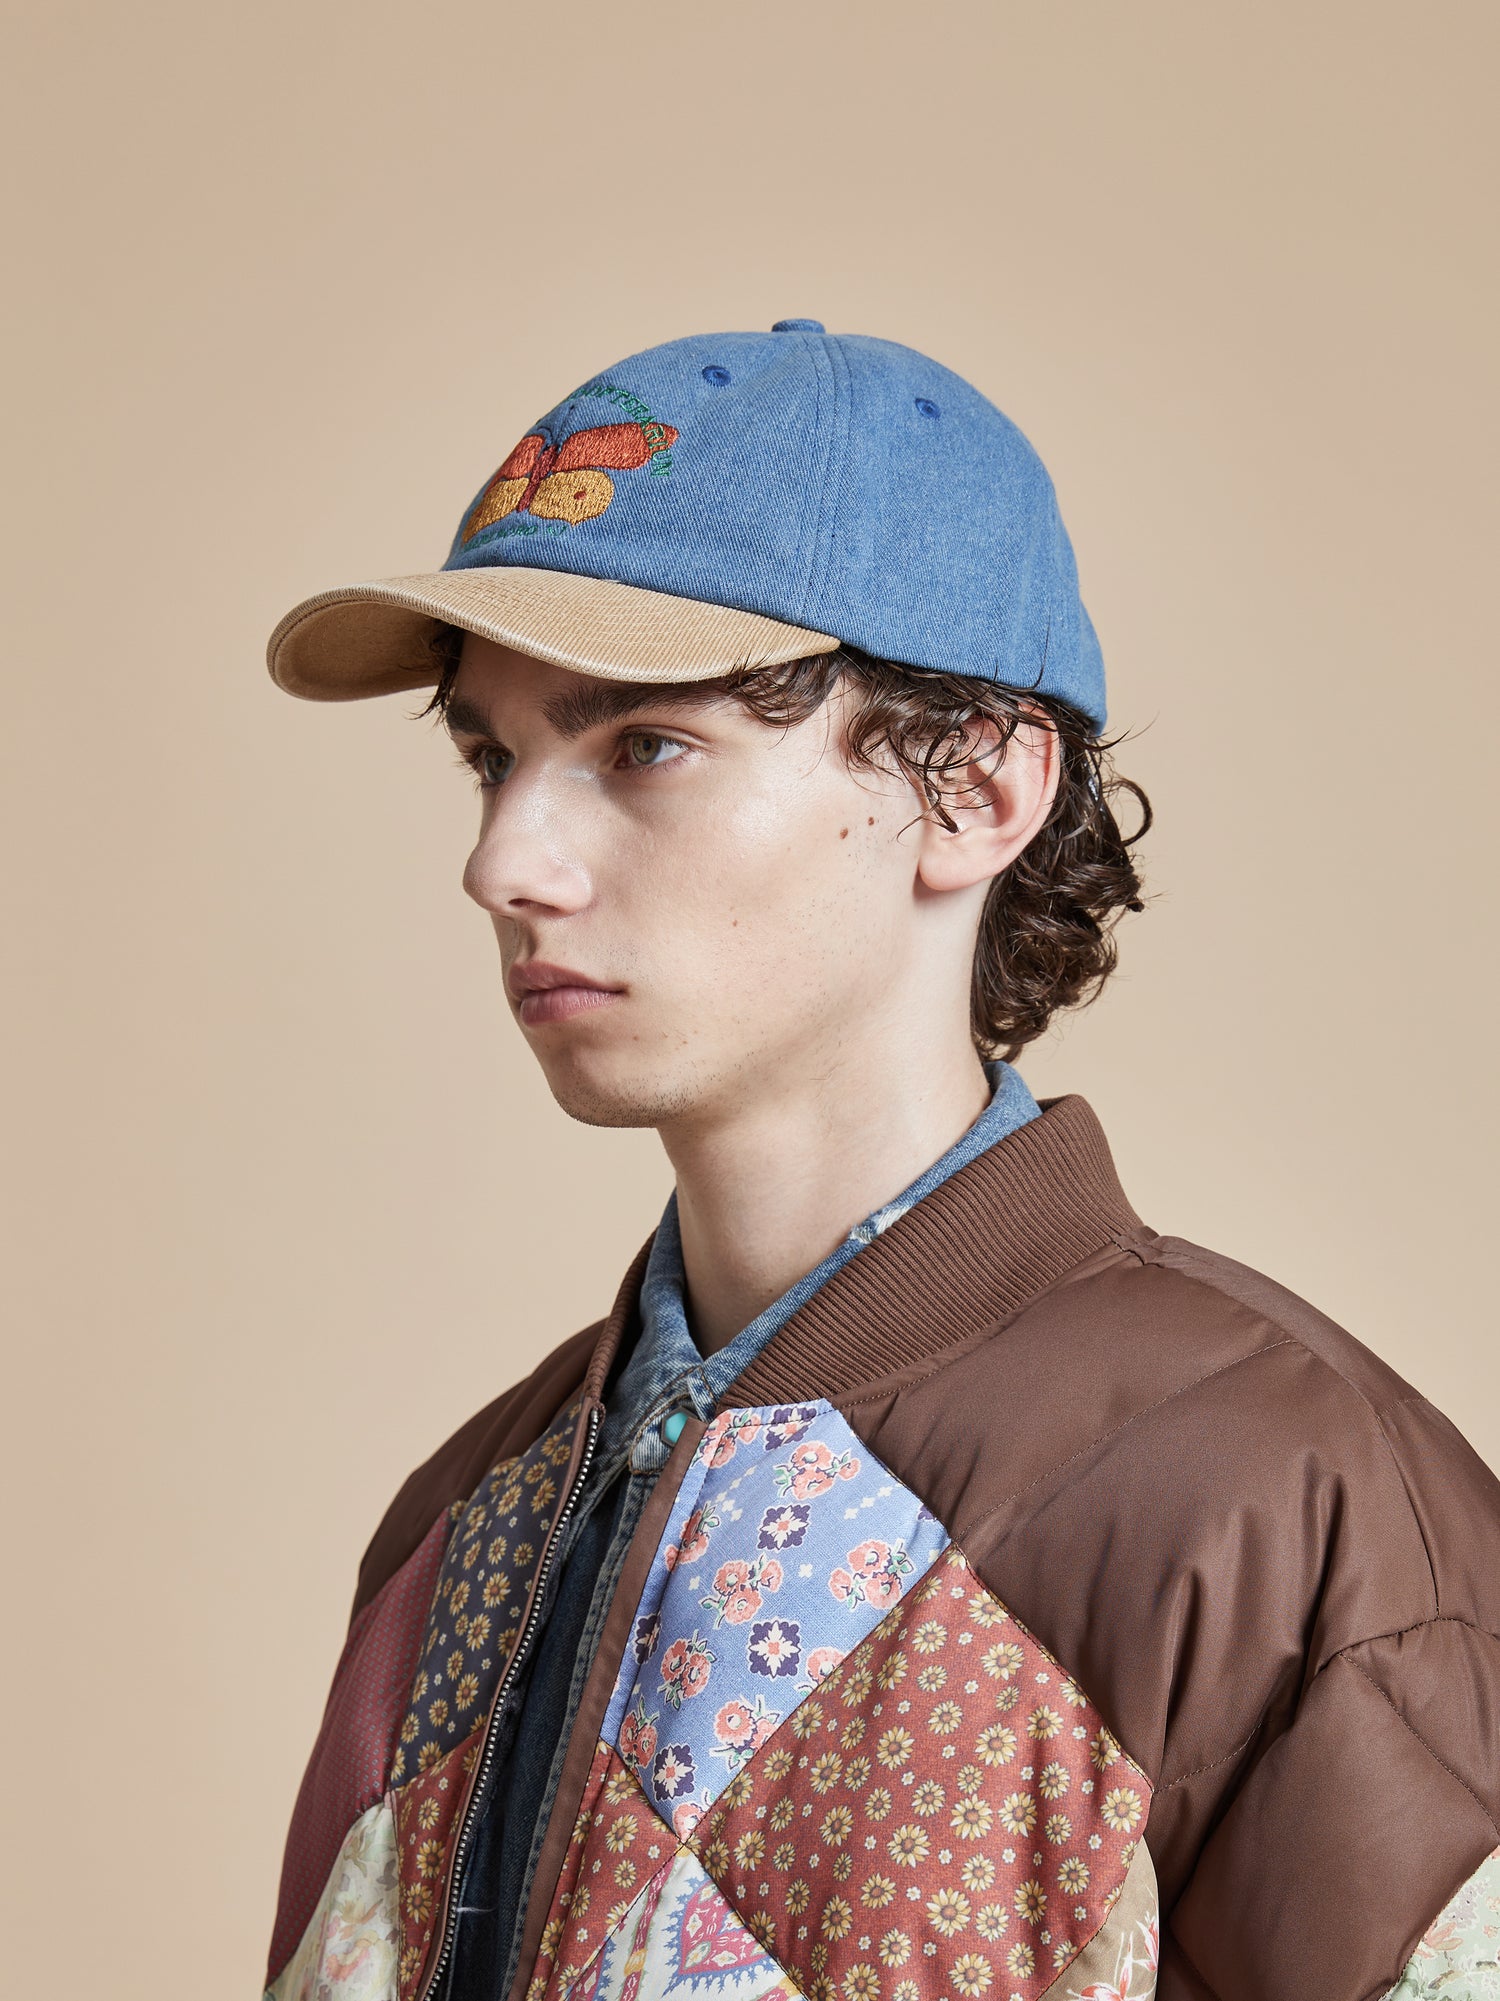 A young man wearing a Found Butterfly House Denim Cap jacket and hat.